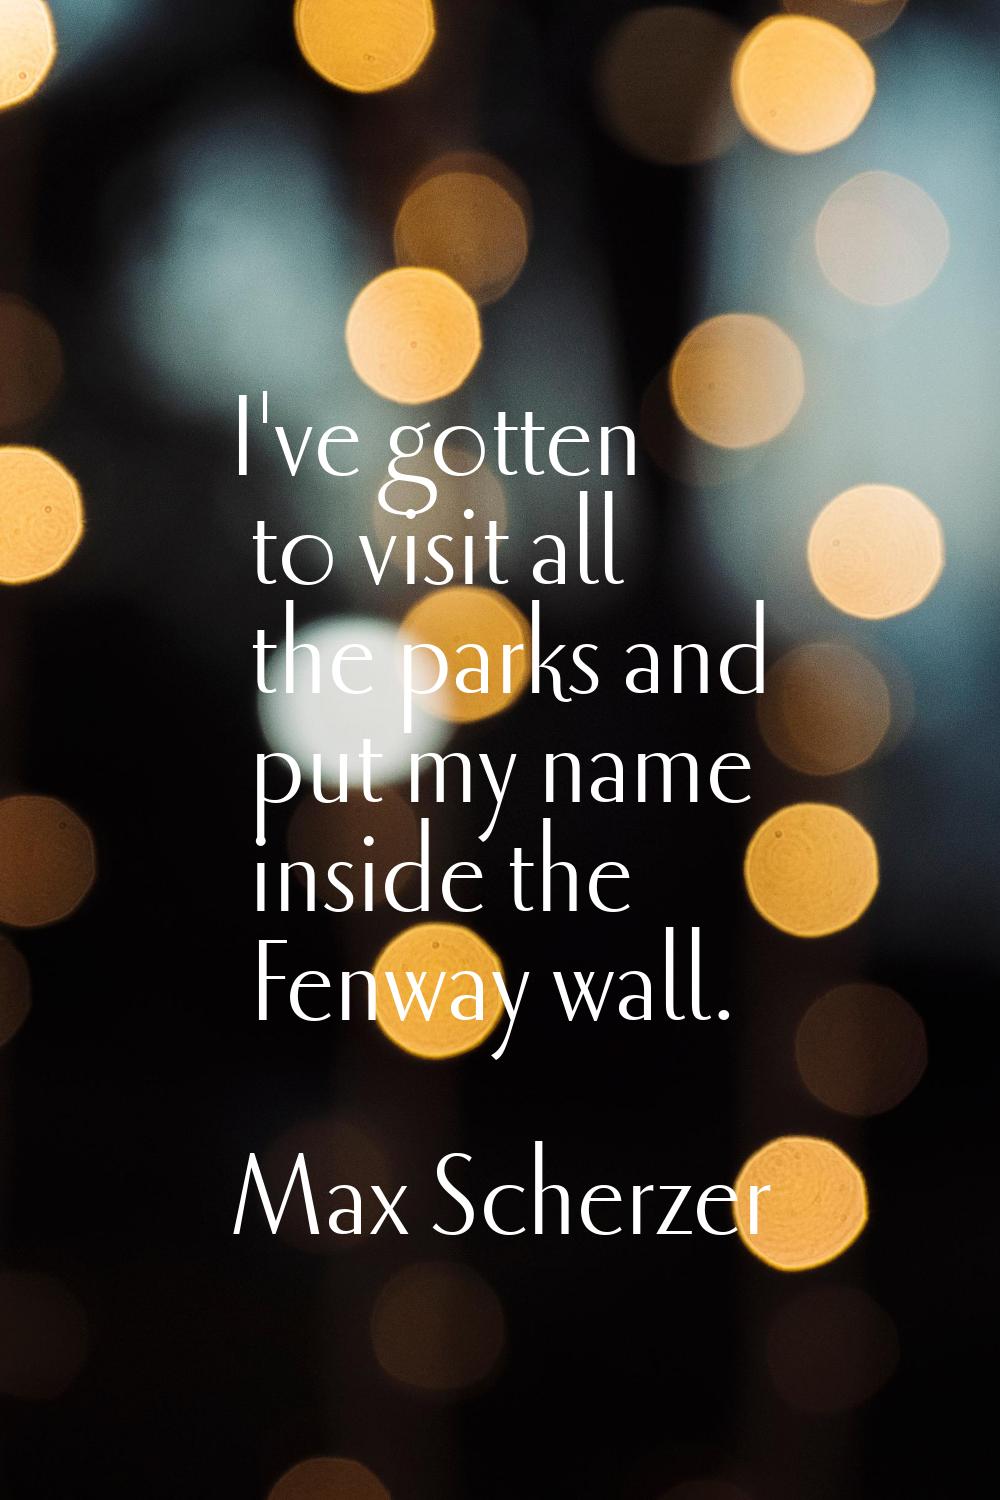 I've gotten to visit all the parks and put my name inside the Fenway wall.